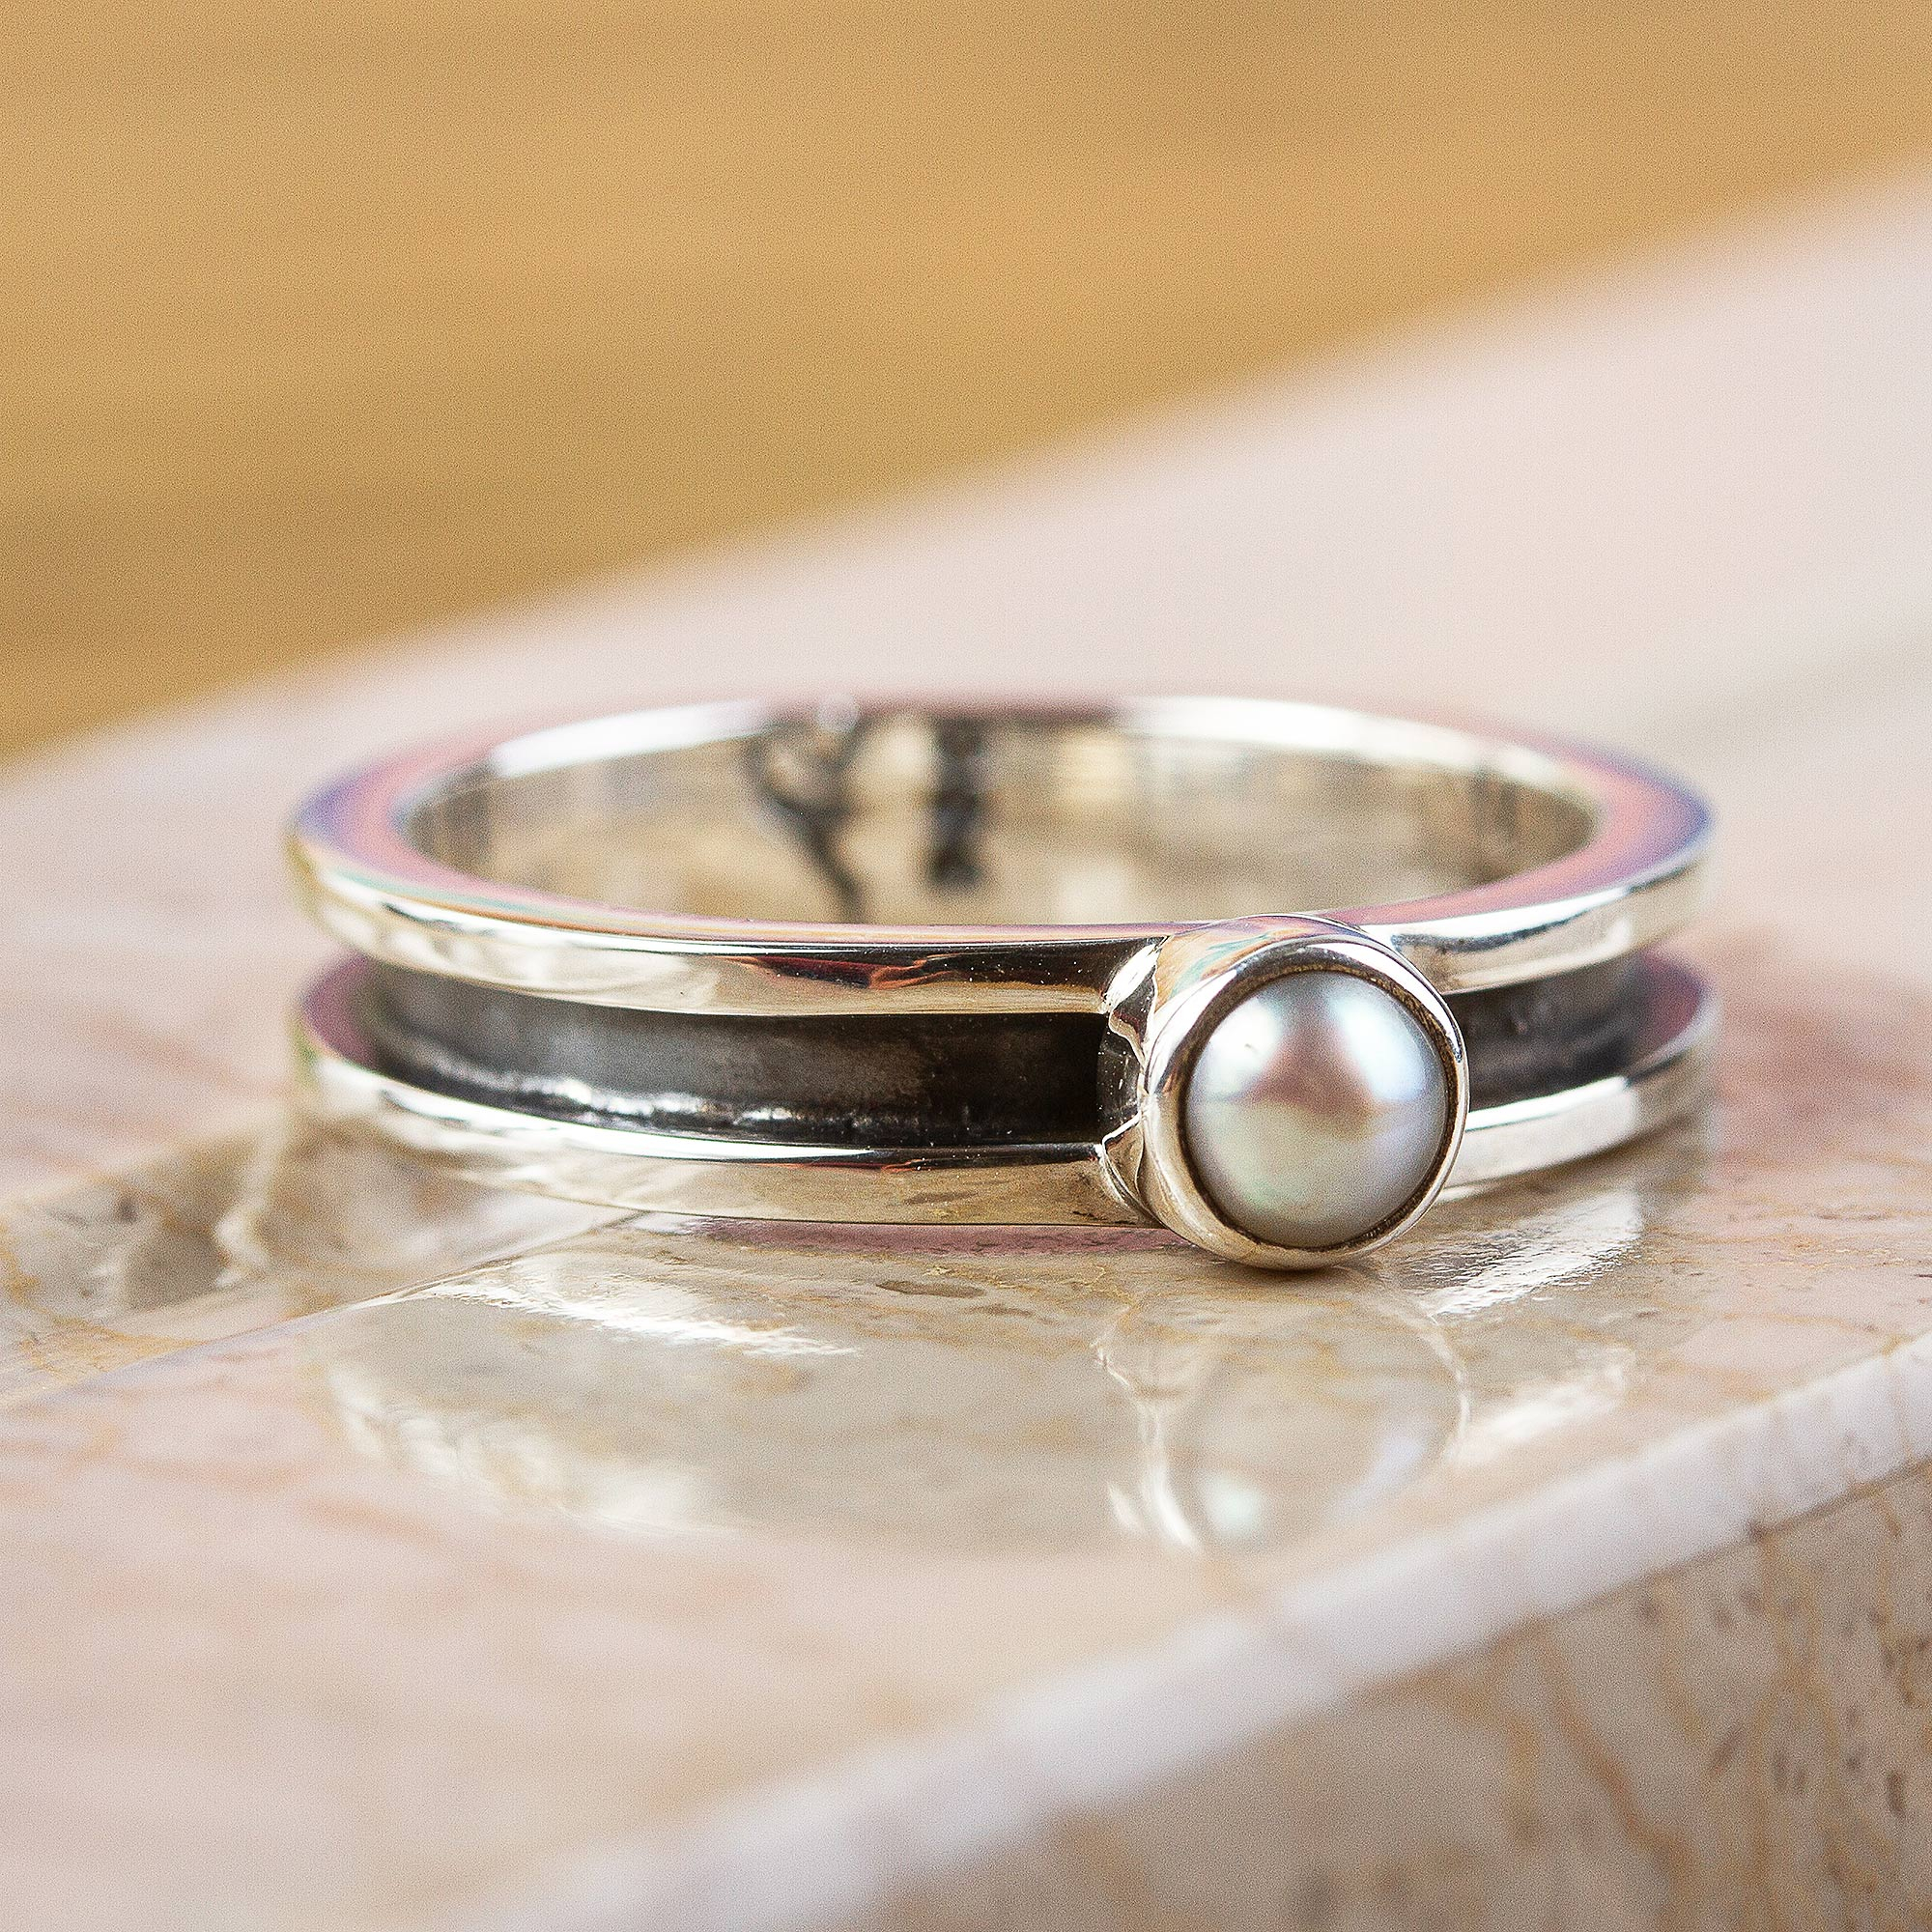 Buy Silver Pearl Ring Men 9 Mm Round Pearl Band Mens Pearl Ring Synthetic Pearl  Ring for Men Heavy Silver Pearl Ring Online in India - Etsy